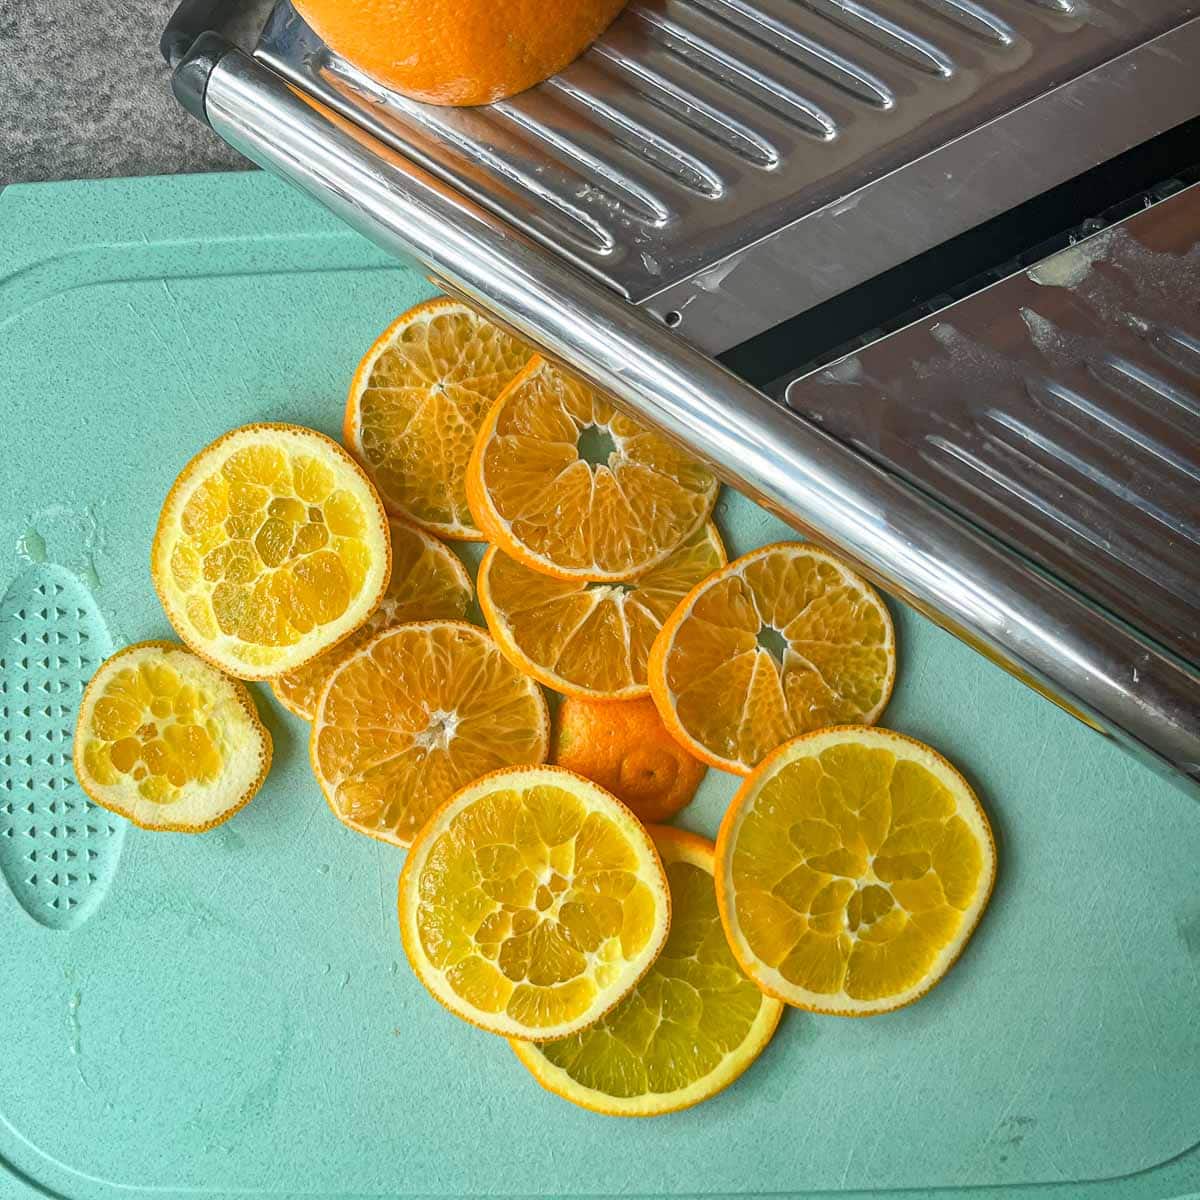 Fast(er) Candied Orange Slices — Poetry & Pies